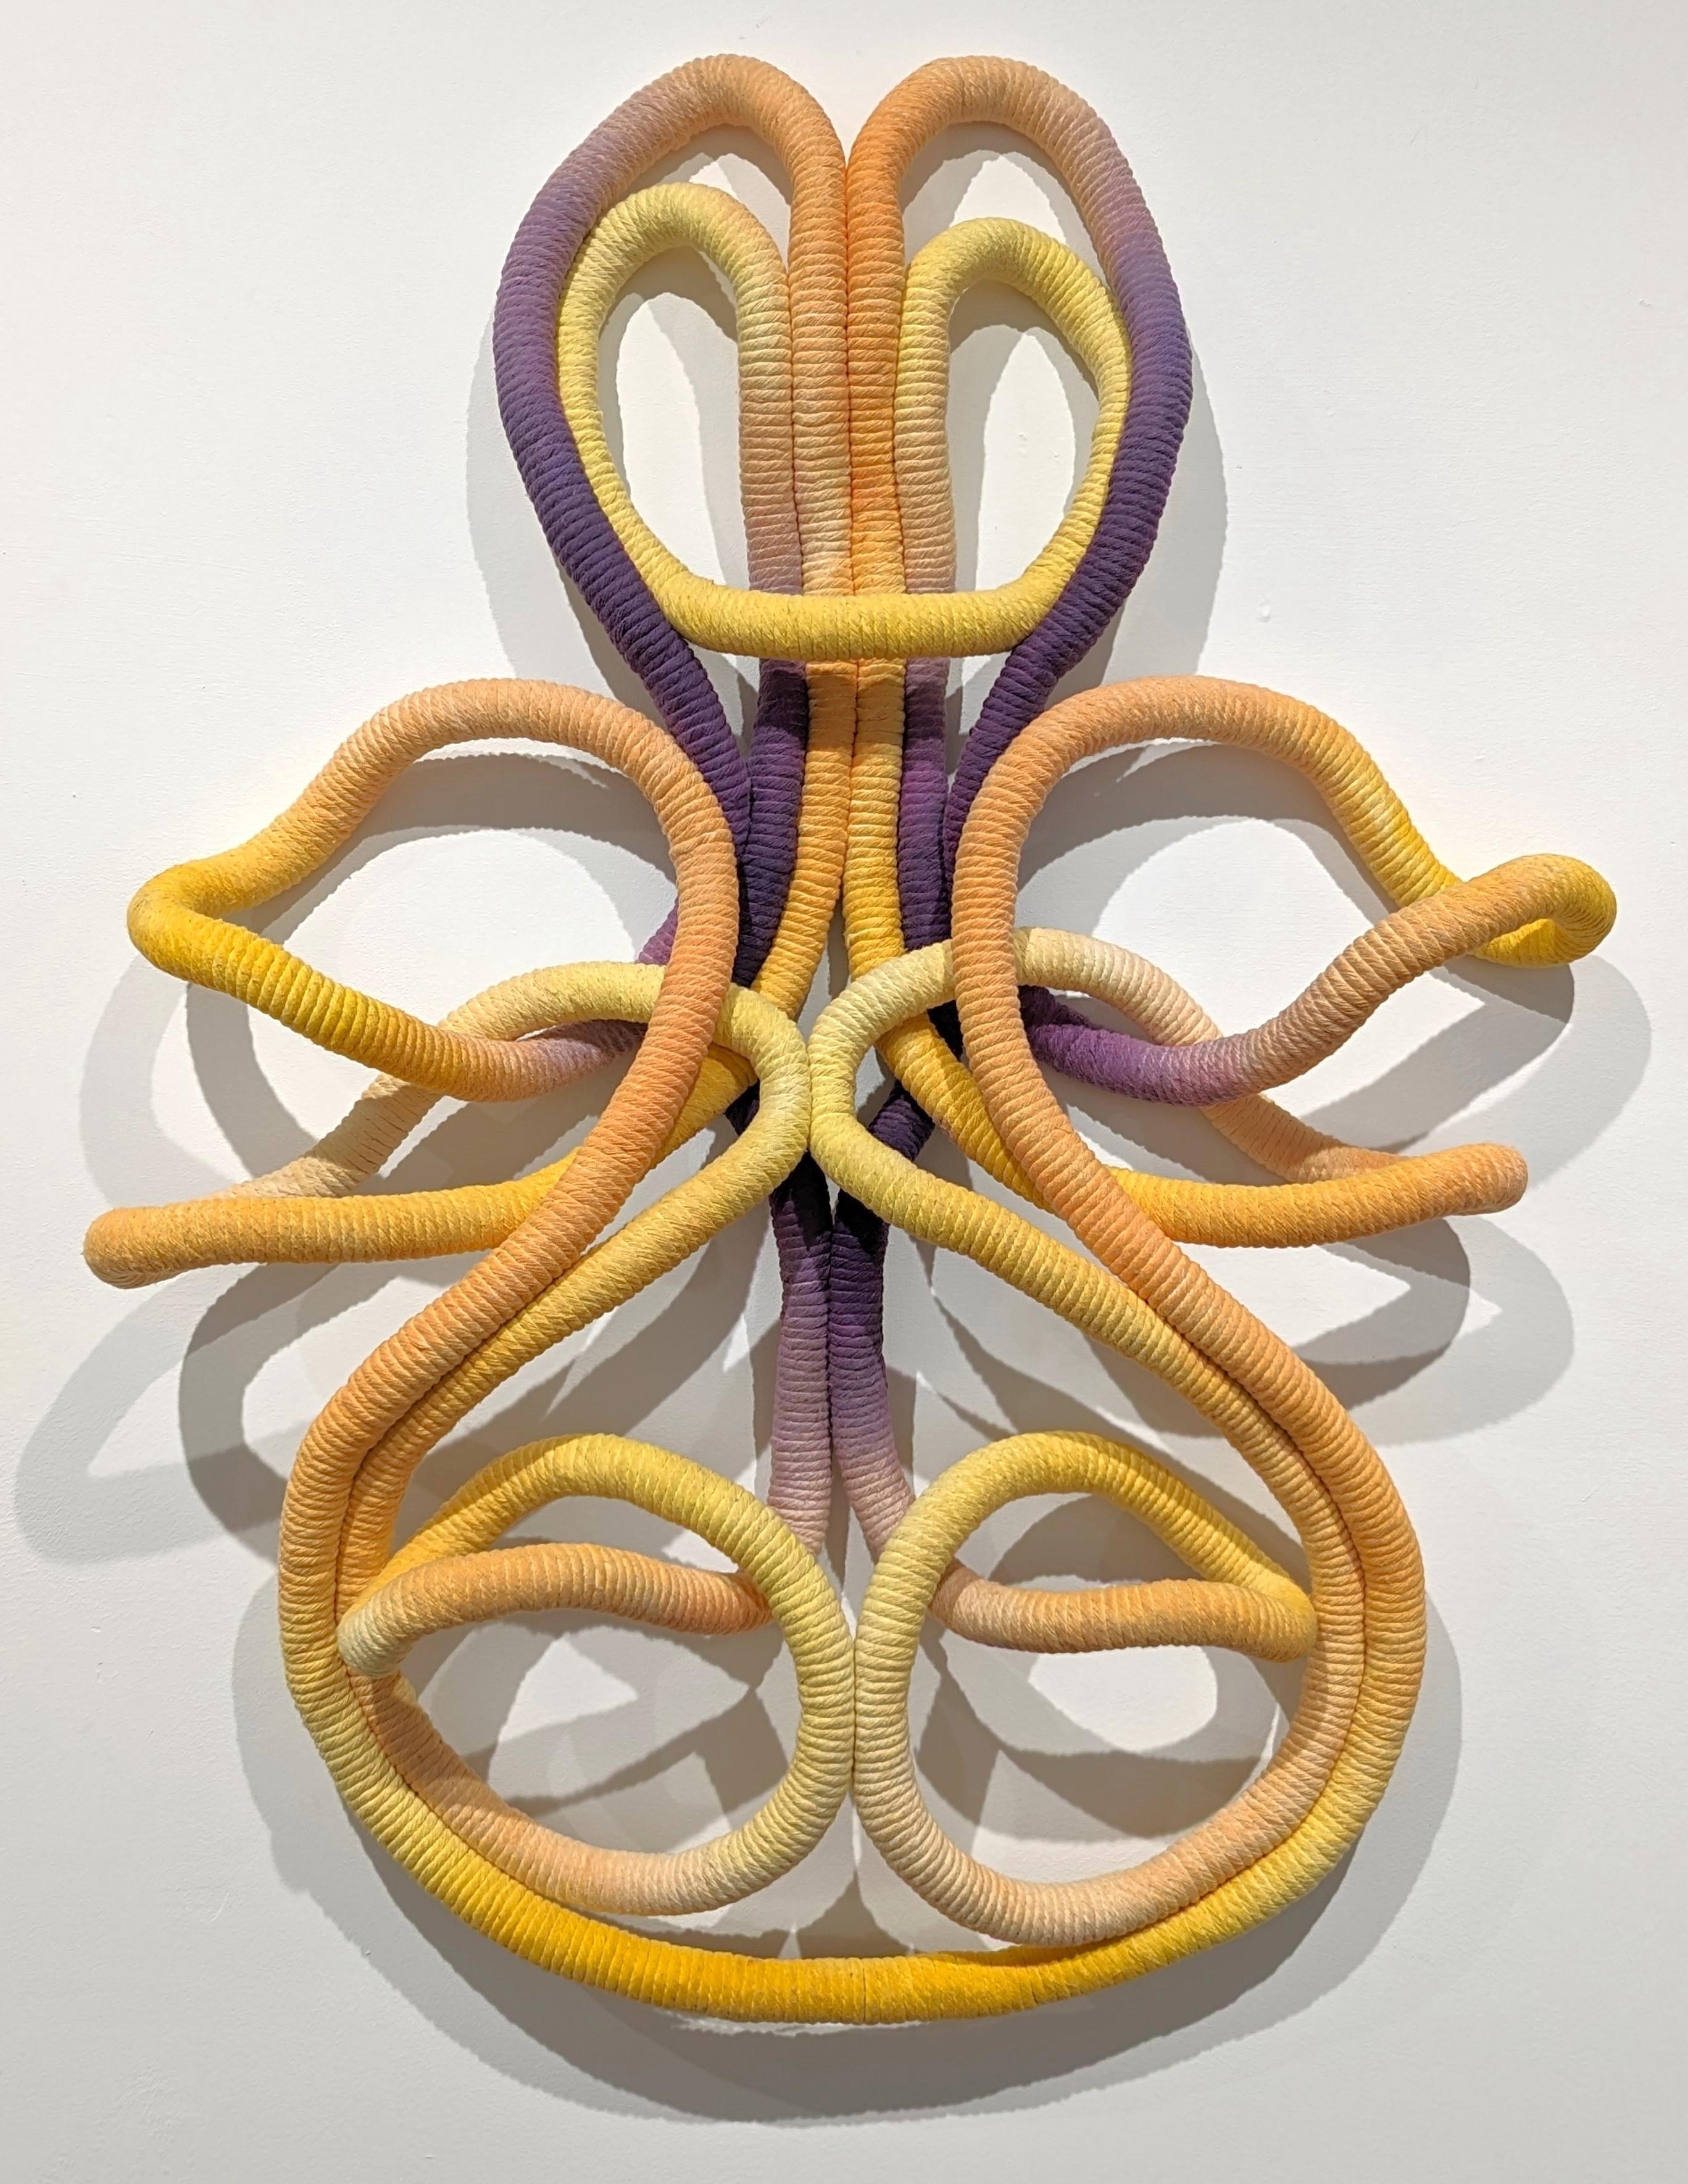 Three dimensional woven wall sculpture by Houston-based contemporary artist Demi Kahn. The work features intertwining pastel yellow, orange, and purple tubes that are made using traditional macrame and weaving techniques. 

Artist Biography: Demi